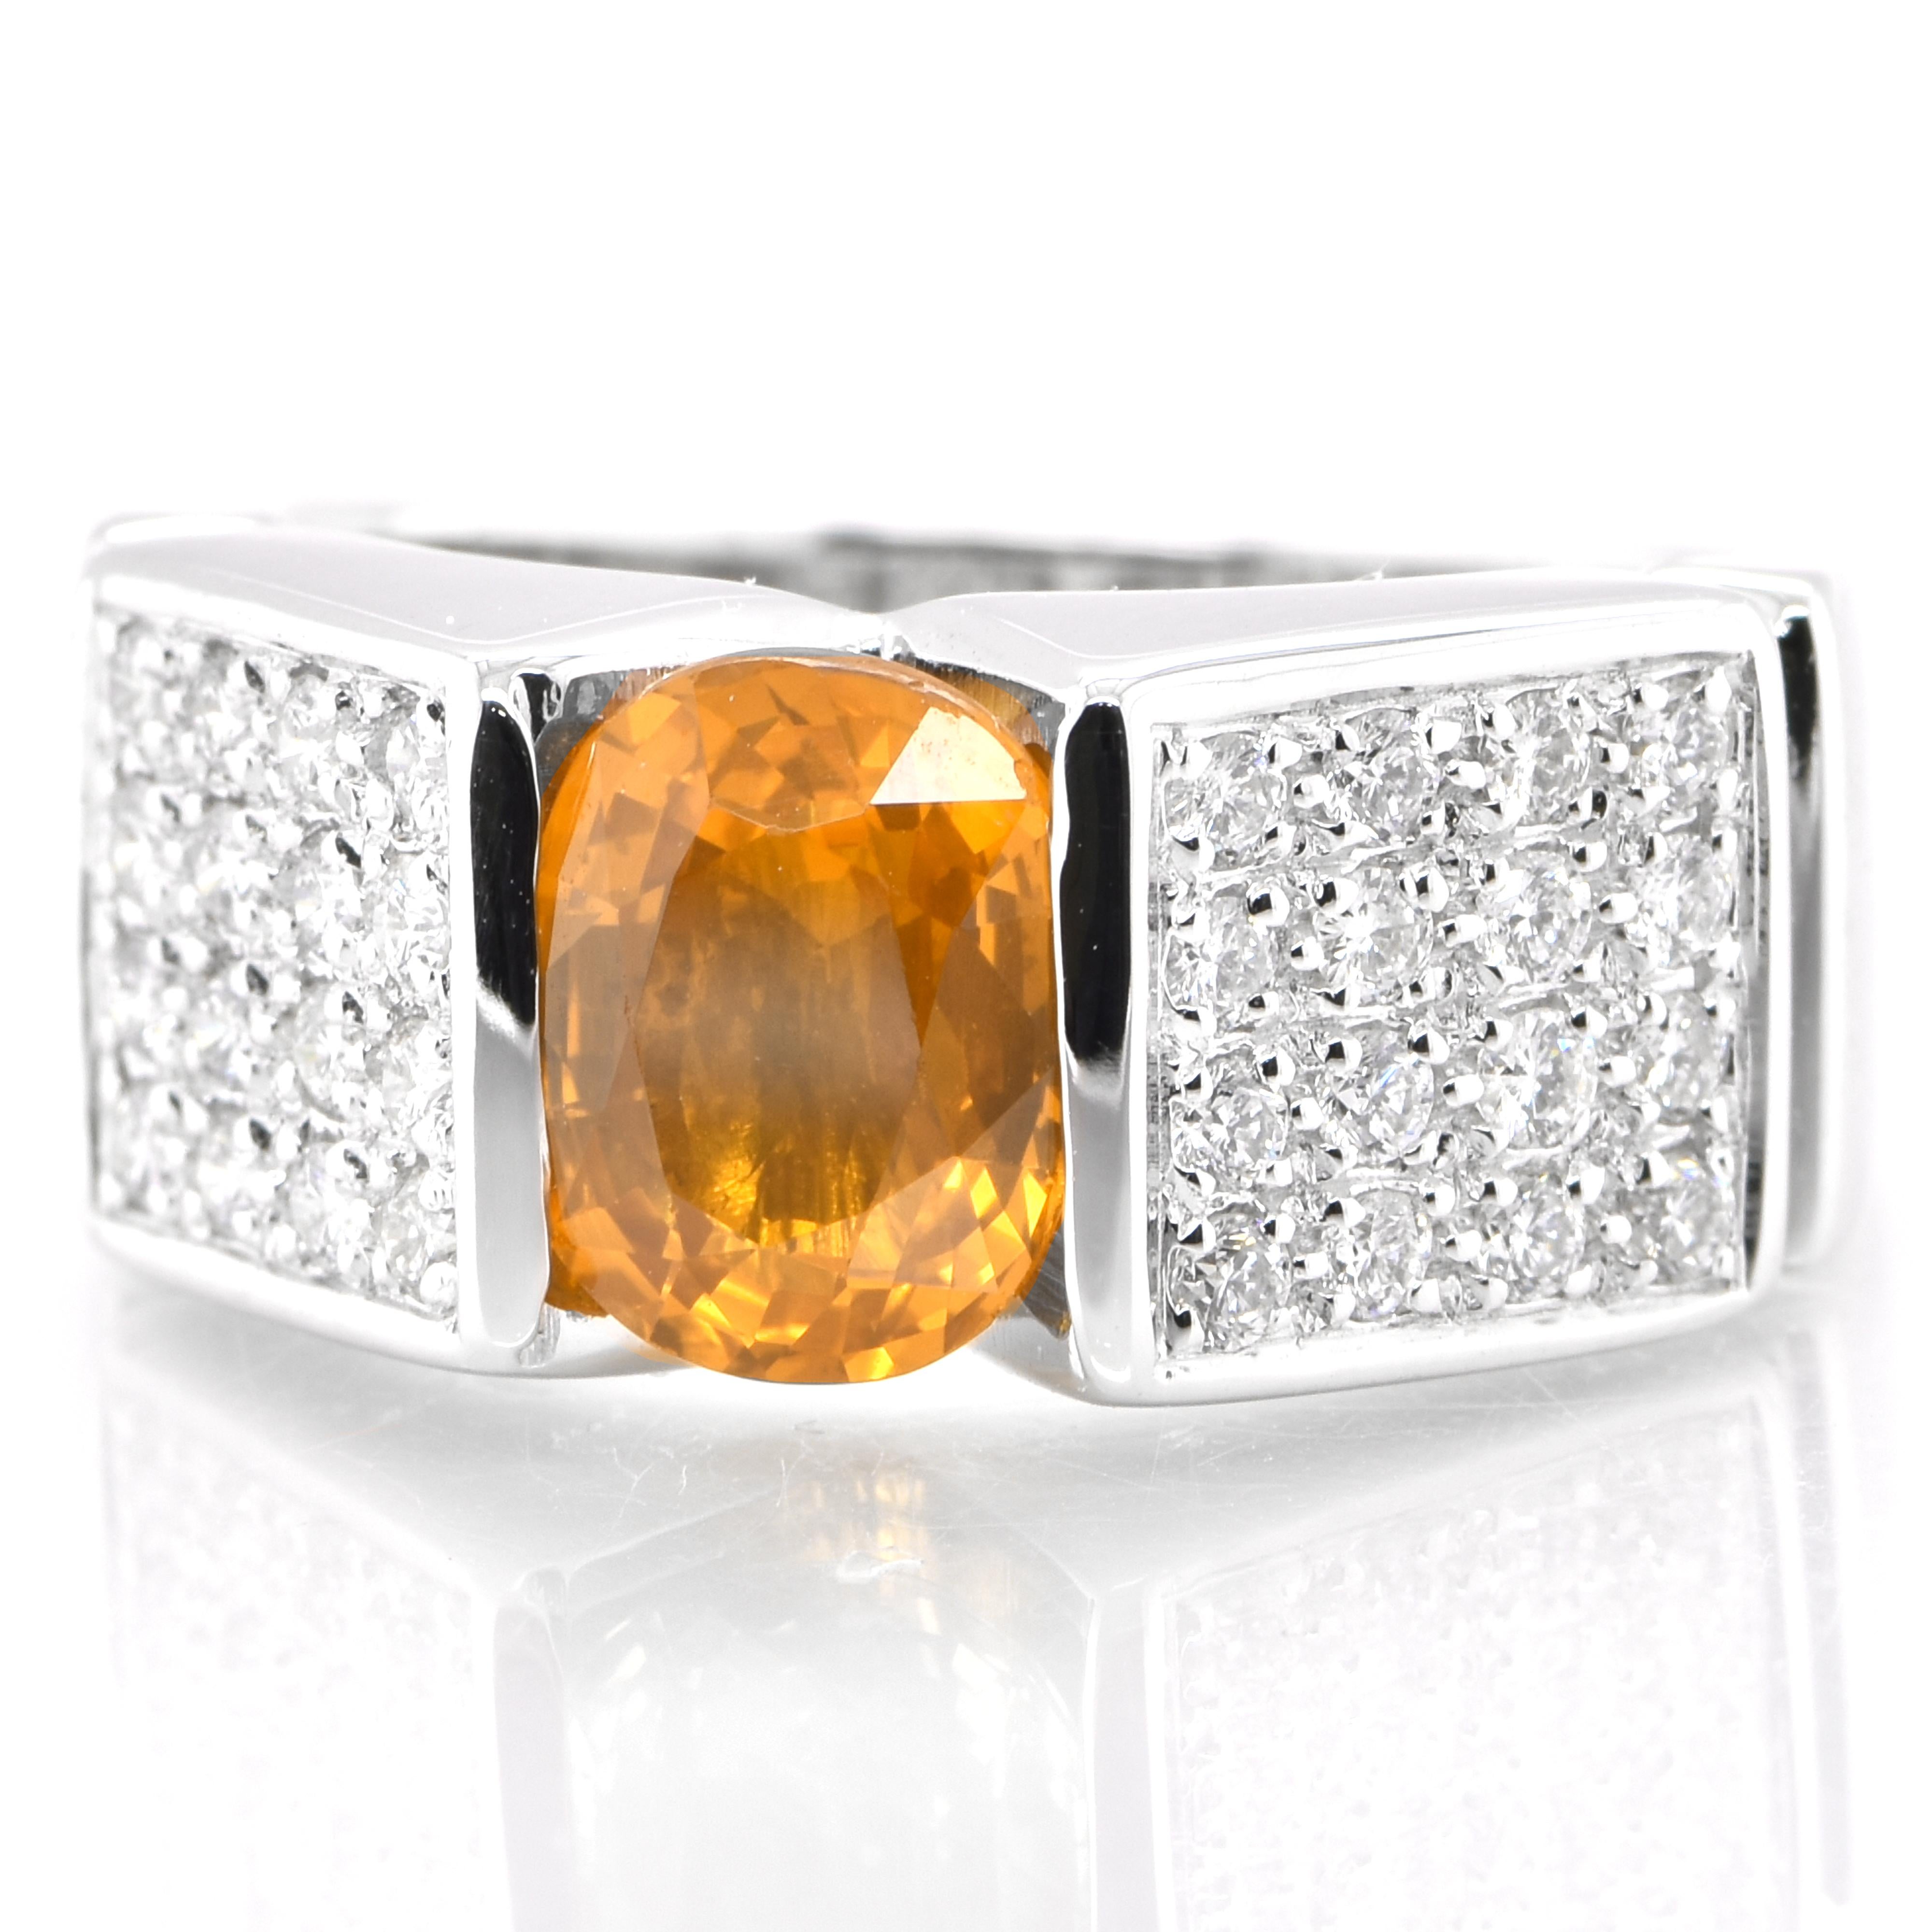 A stunning ring featuring a 2.22 Carat Natural Yellow Sapphire and 0.46 Carats of Diamond Accents set in 18 Karat Gold. Sapphires have extraordinary durability - they excel in hardness as well as toughness and durability making them very popular in